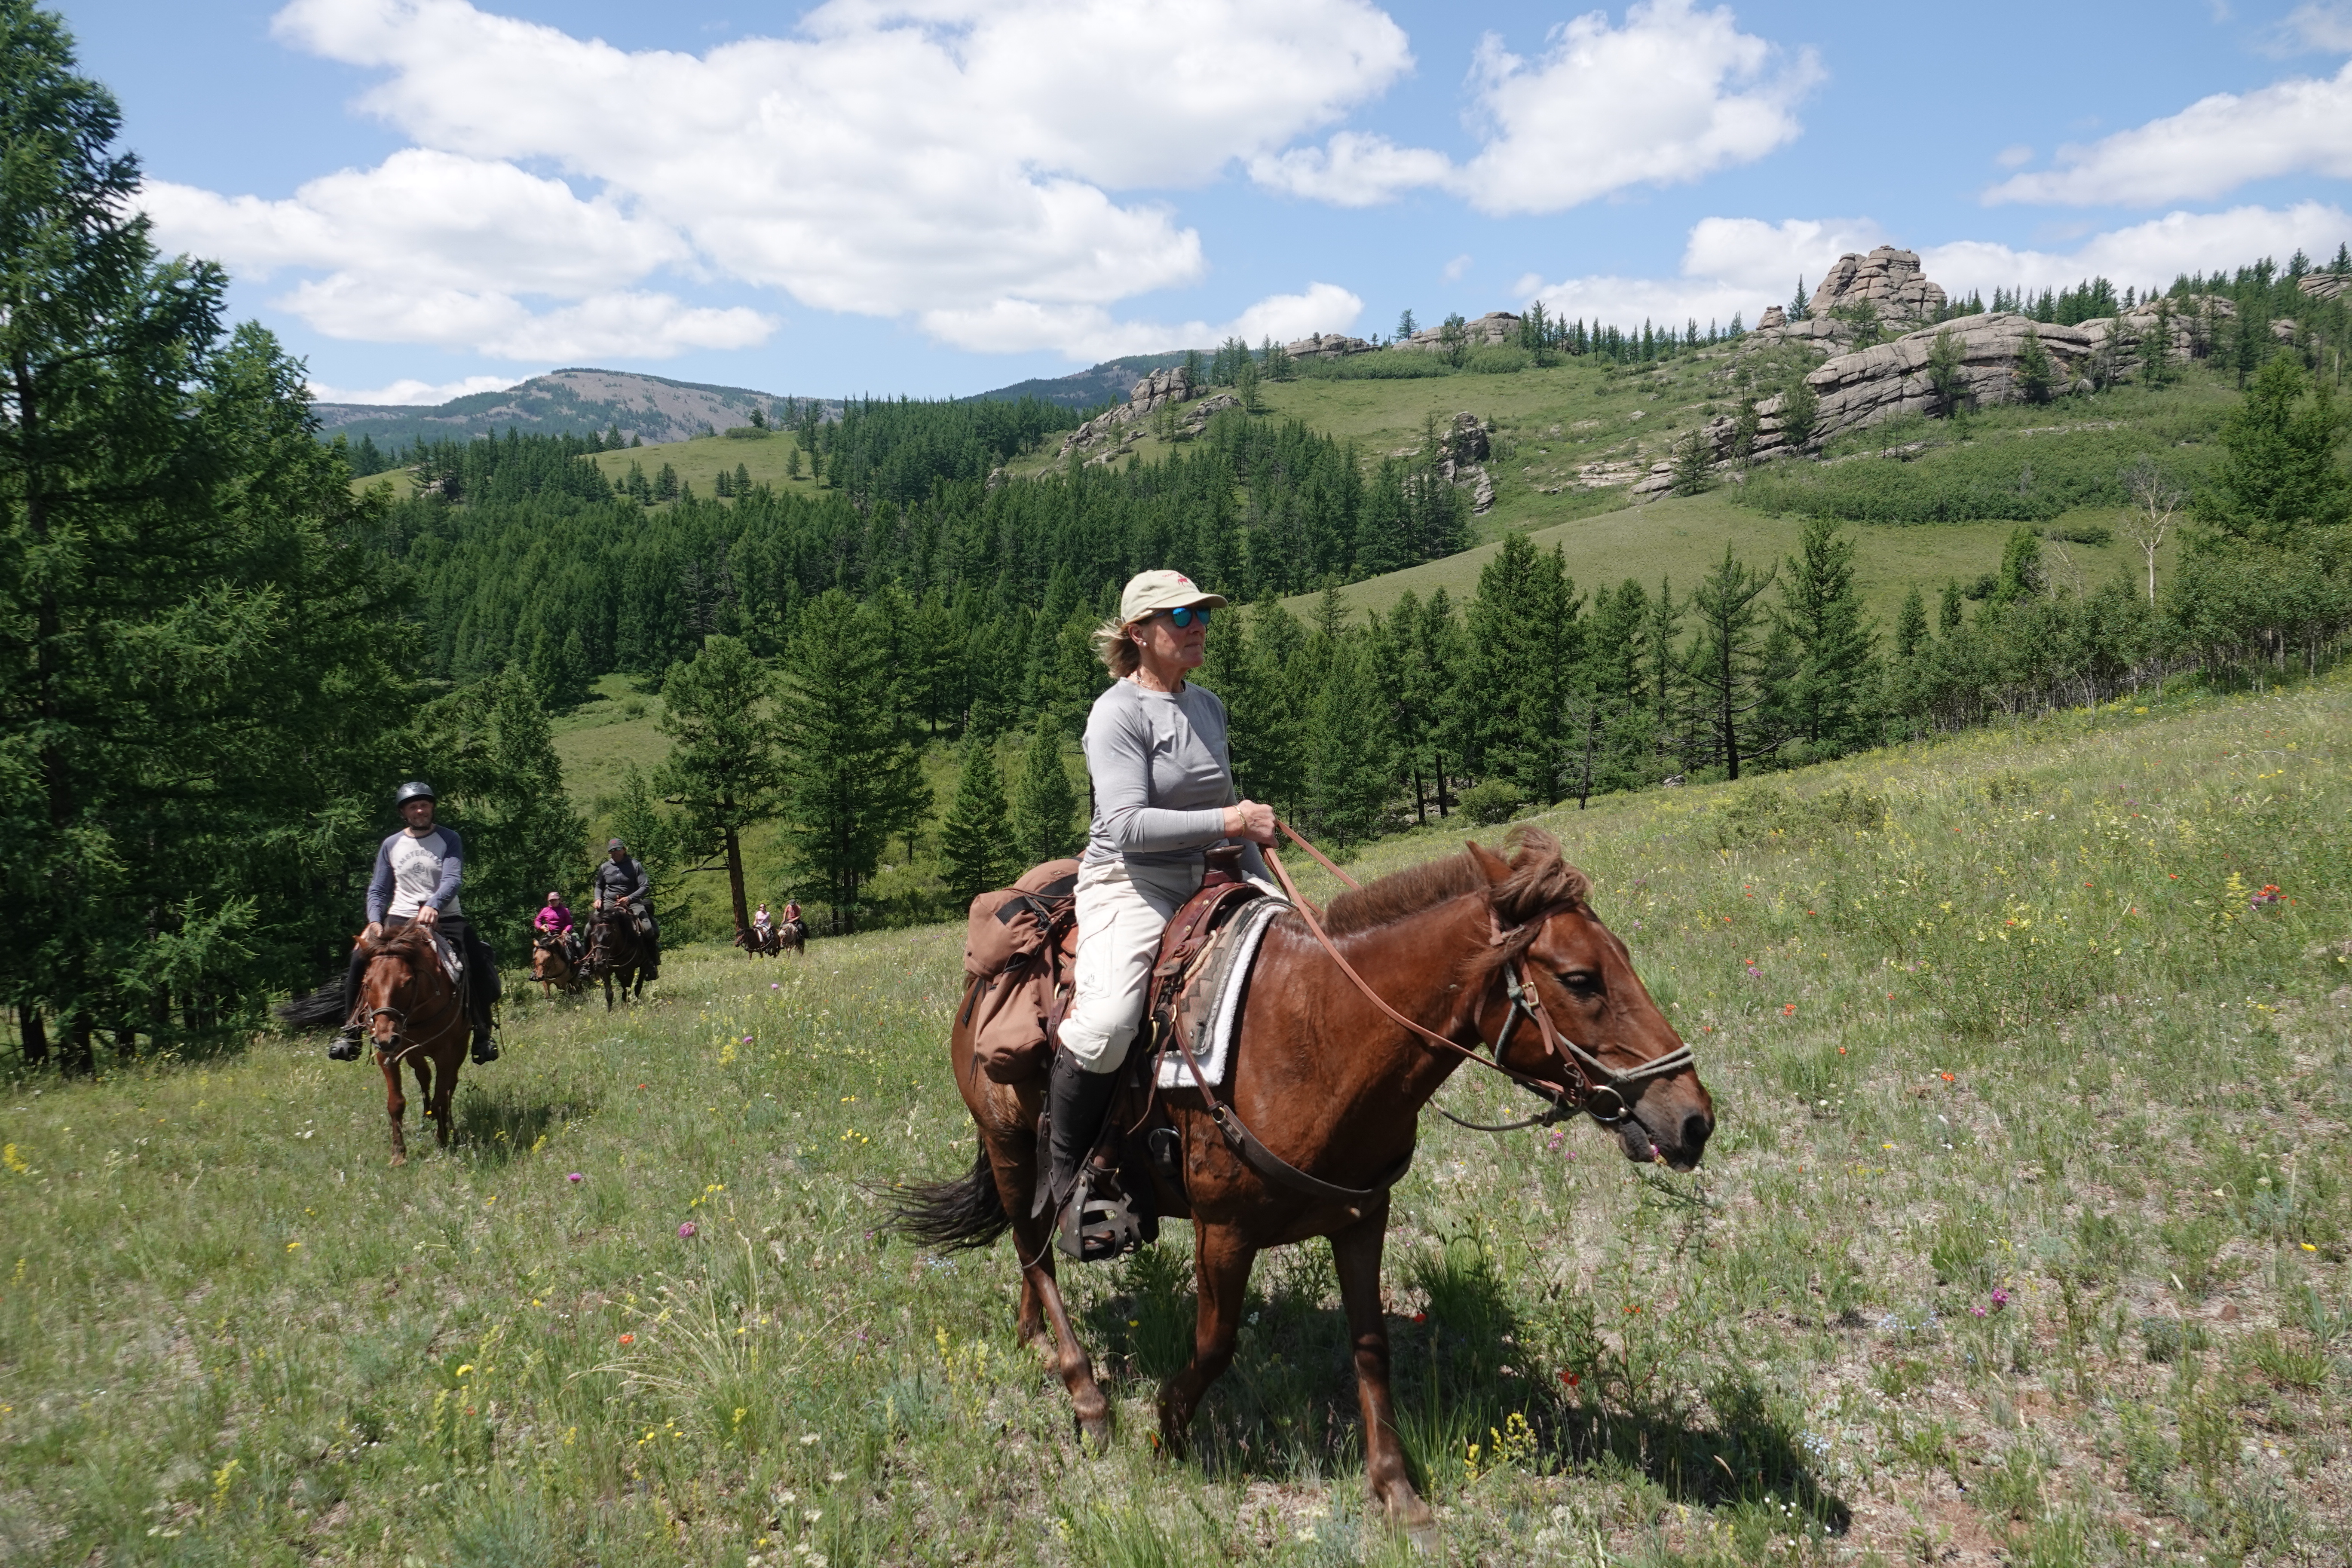 Mongolia Covid-19 Information, Stone Horse Expeditions, Horseriding Tours, 2020, 2021